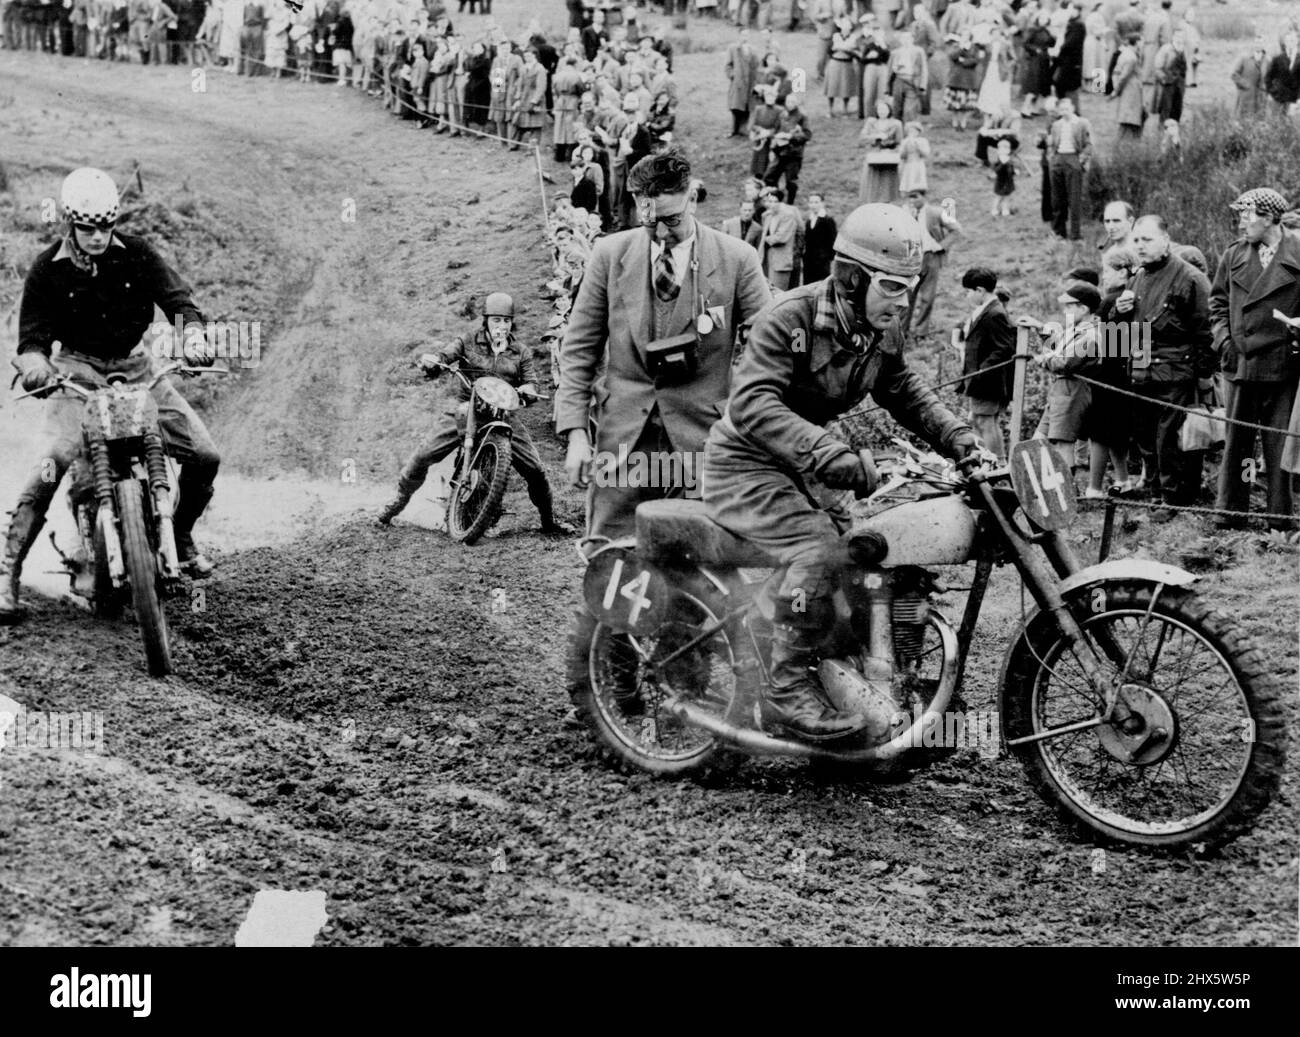 Hobby Riders Test Motorcycles -- Muddy going as Britain's amateur motorcyclist compete in inter-Club scramble. Simulating worst possible motorcycling conditions, with addition of competitive urge of racing, enthusiasts of British motor cycle clubs prove sternest critics of manufacturing quality for machines finding markers all over the world. March 11, 1952. (Photo by Central Office of Information, London). Stock Photo